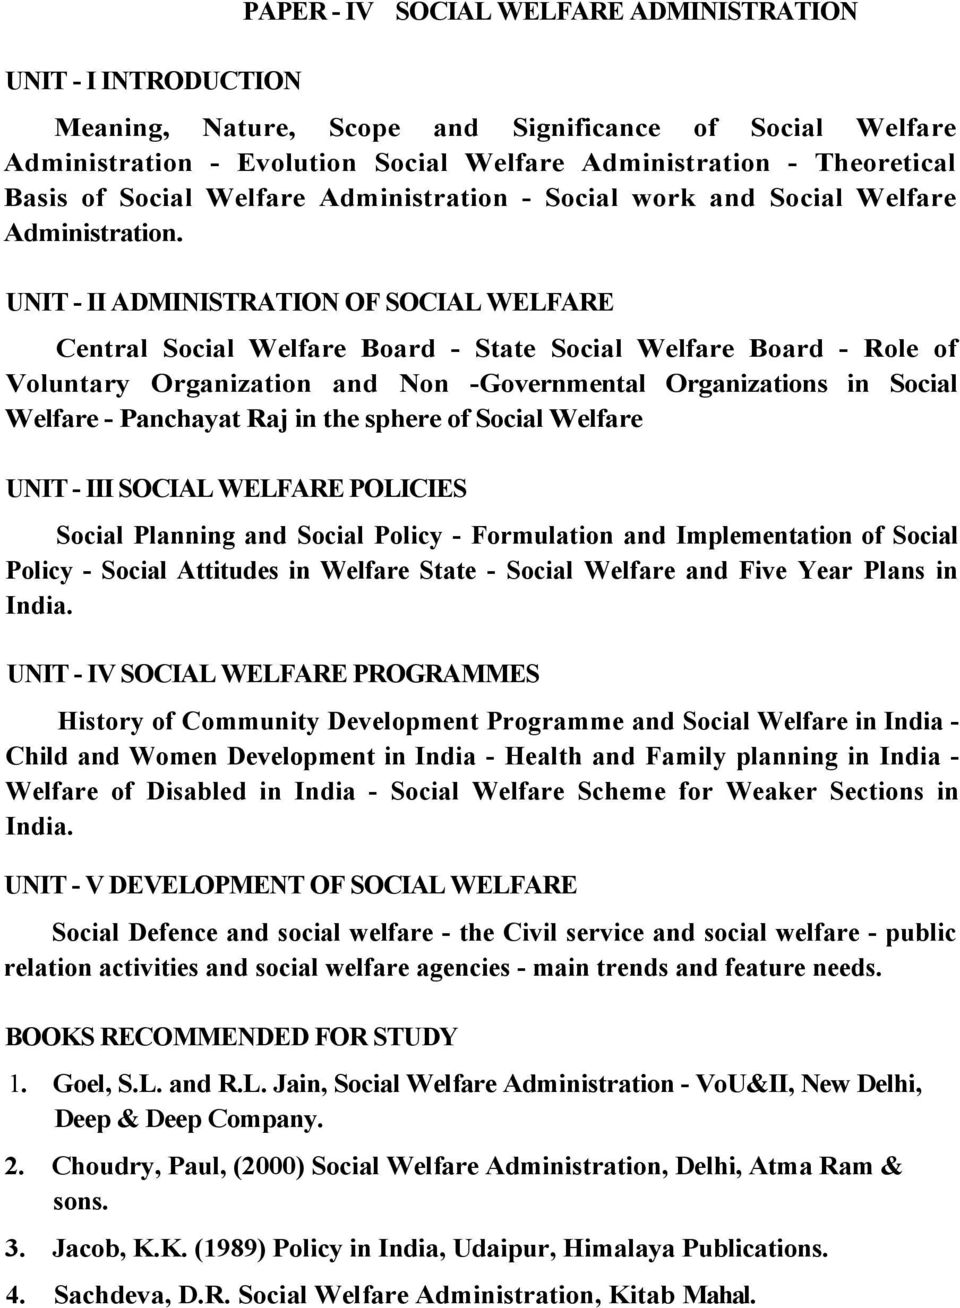 UNIT - II ADMINISTRATION OF SOCIAL WELFARE Central Social Welfare Board - State Social Welfare Board - Role of Voluntary Organization and Non -Governmental Organizations in Social Welfare - Panchayat